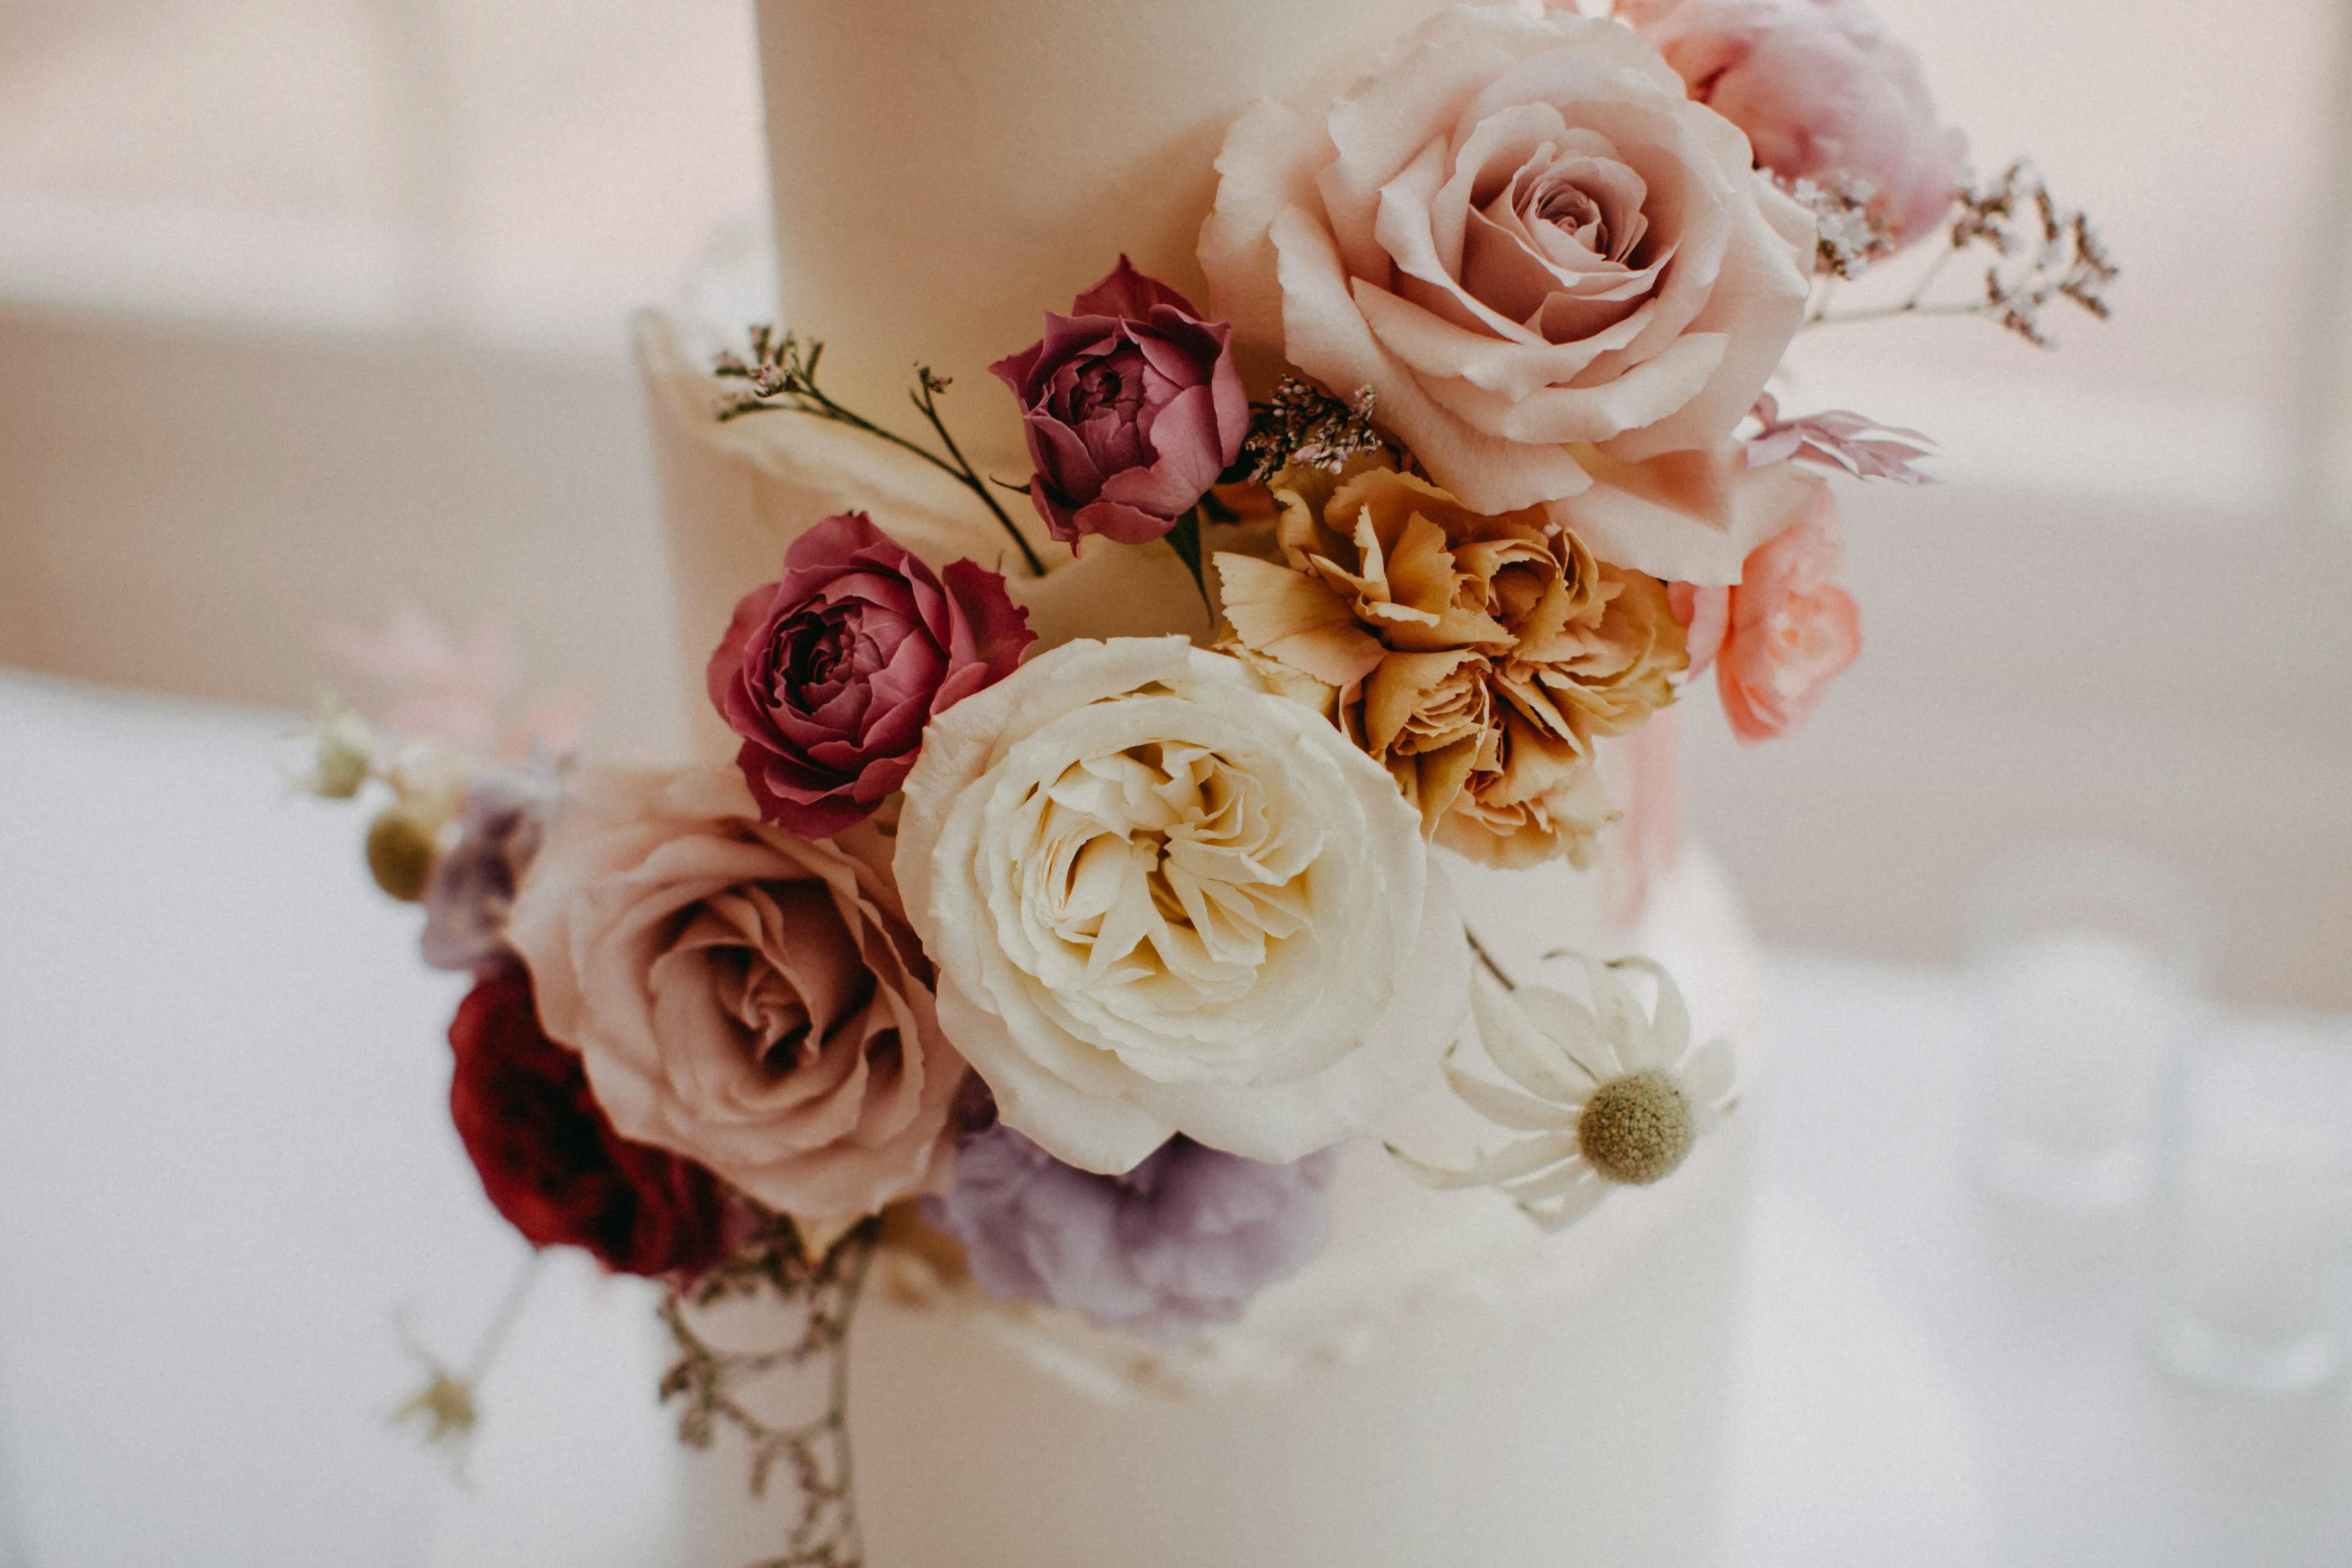 A two-tiered white wedding cake adorned with a beautiful arrangement of roses and other flowers in various colors including white, pink, and purple. The flowers cascade gently from the top to the bottom tier.